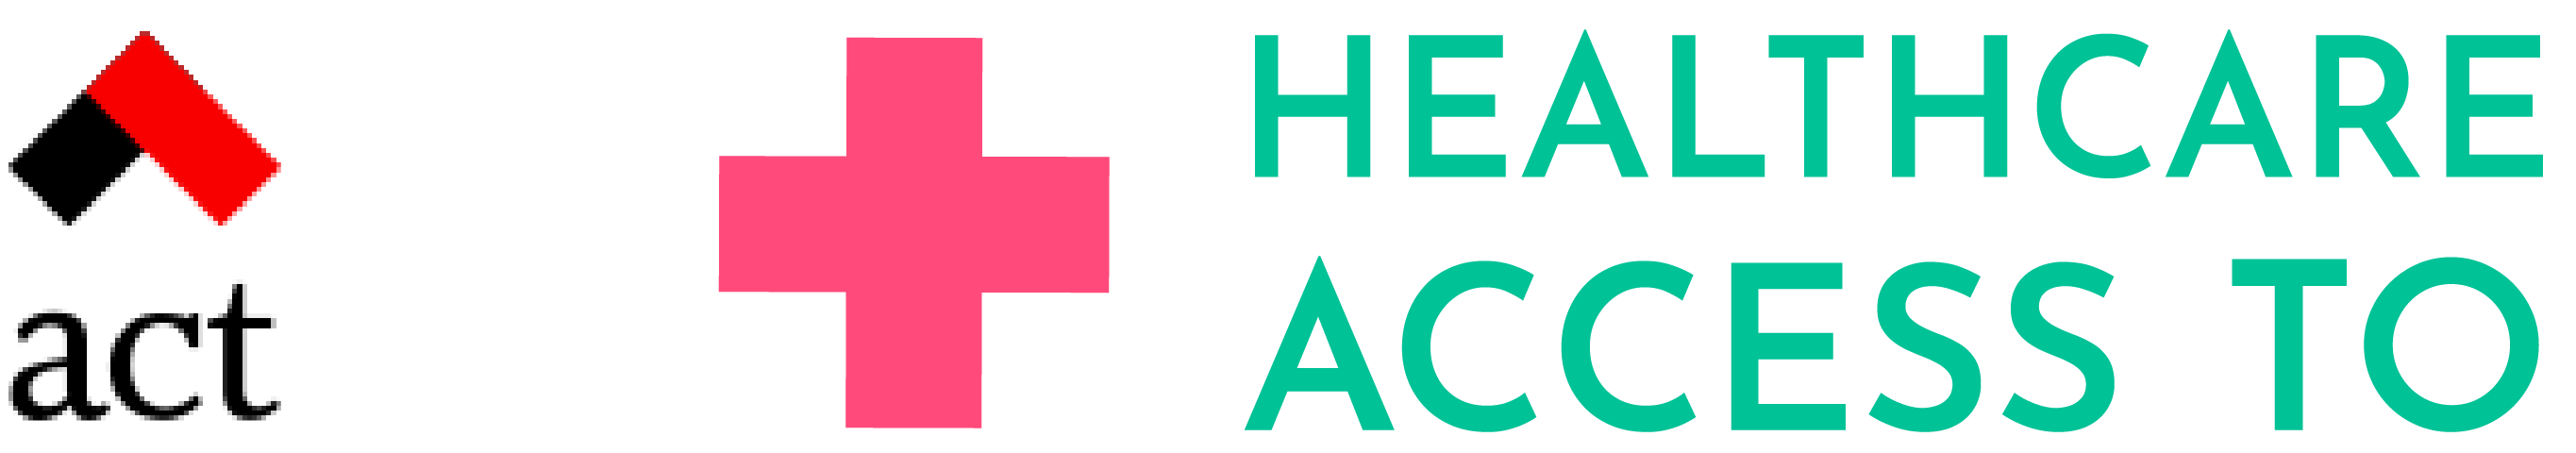 Healthcare Access TO